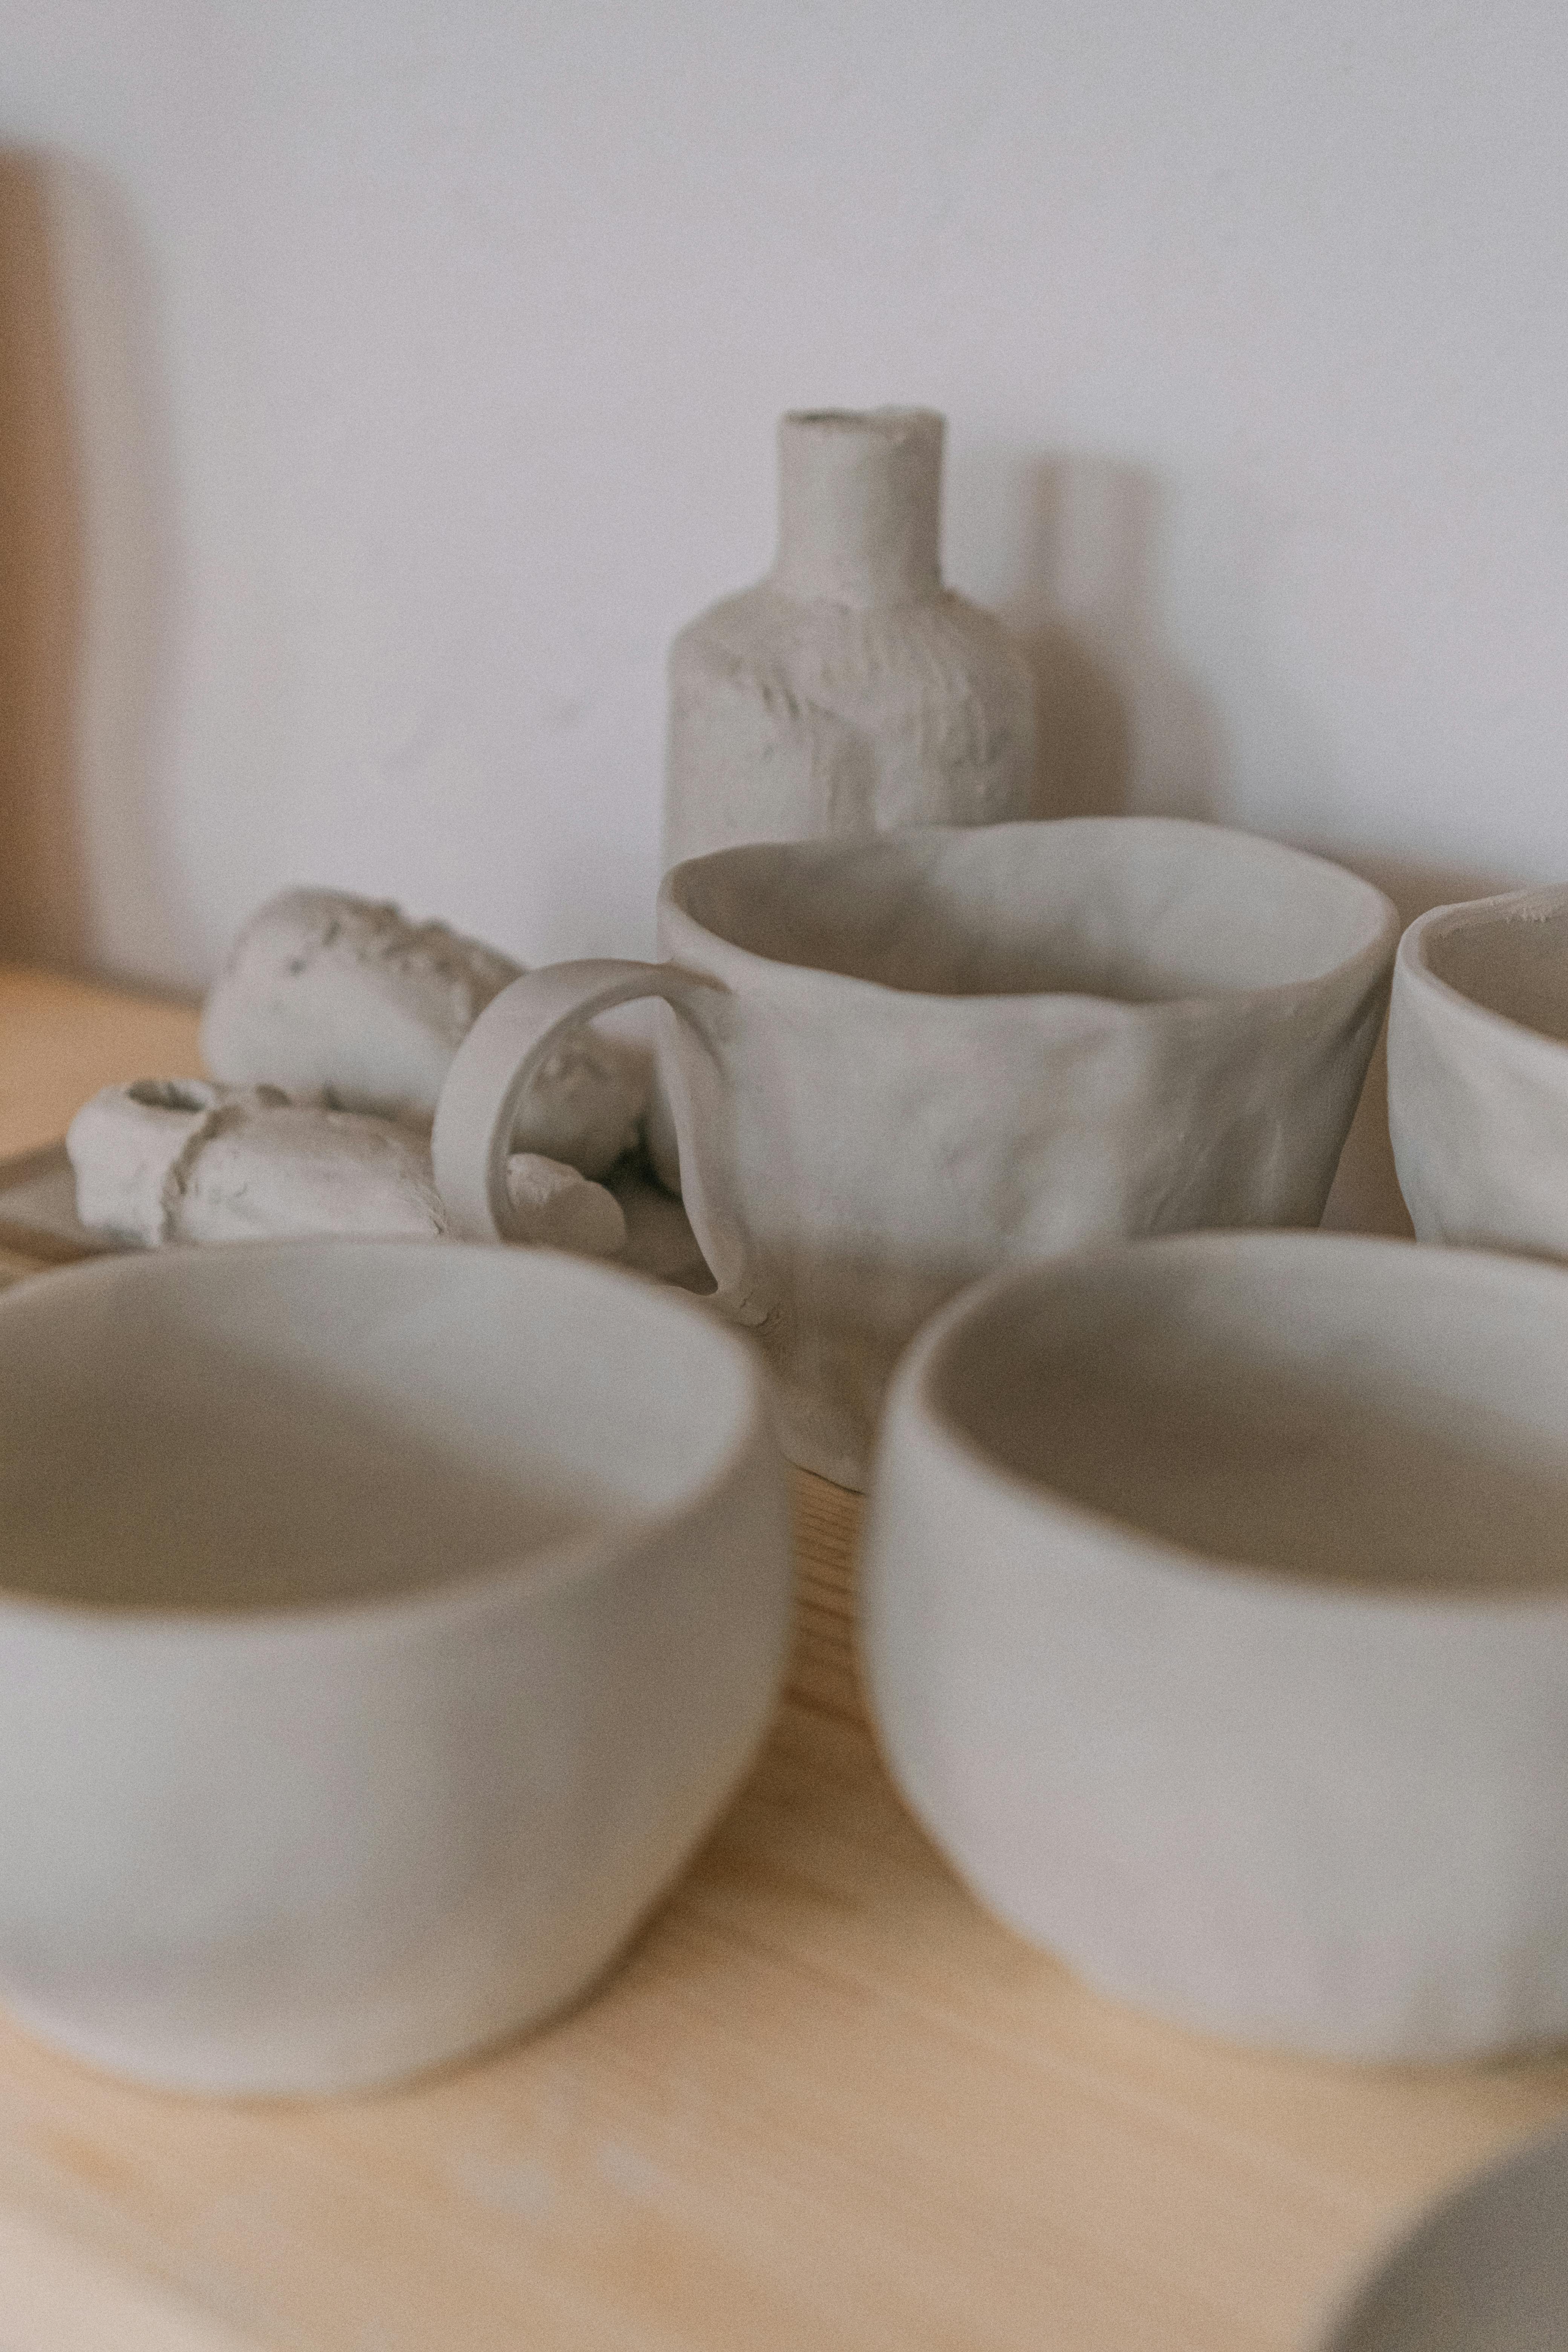 Crafting Handcrafted Pottery: A Behind-the-Scenes Journey